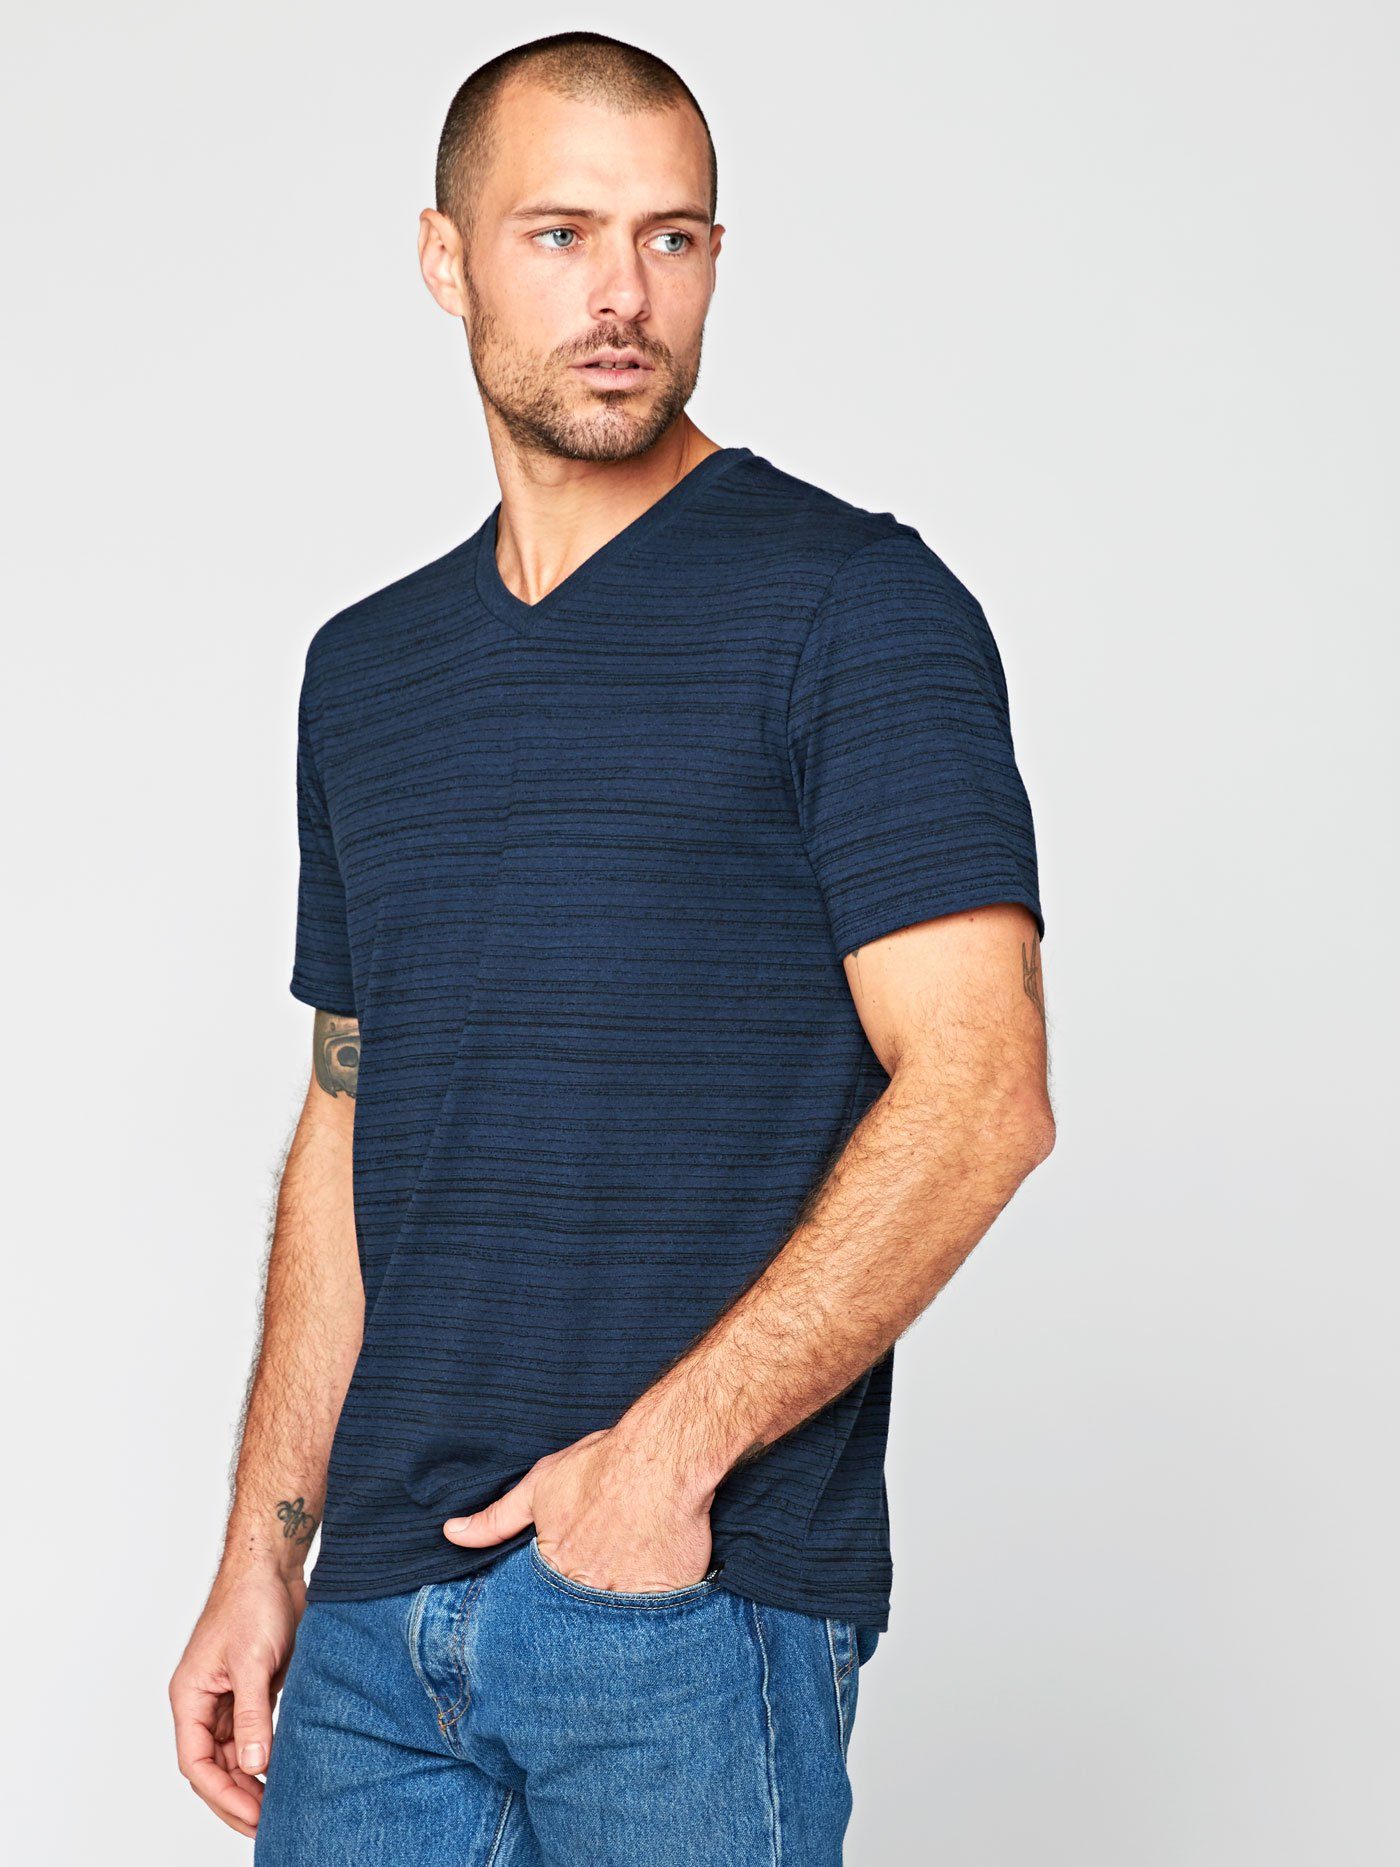 Dirt Road Stripe V-Neck Mens Tops Threads 4 Thought